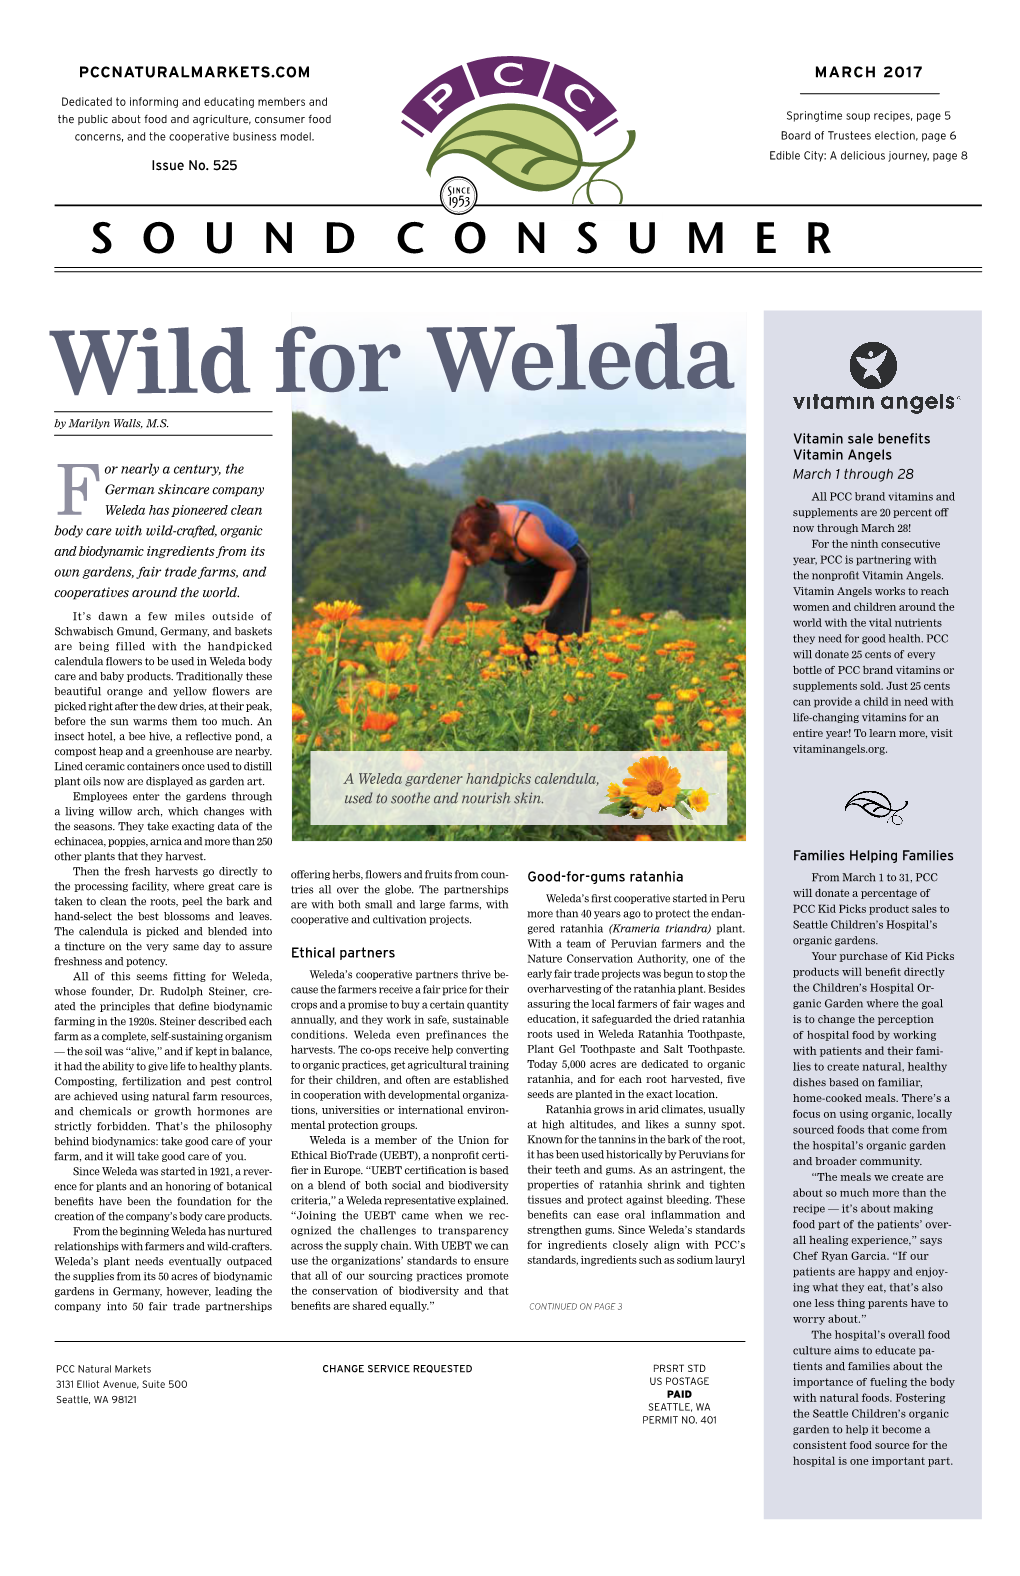 Wild for Weleda by Marilyn Walls, M.S